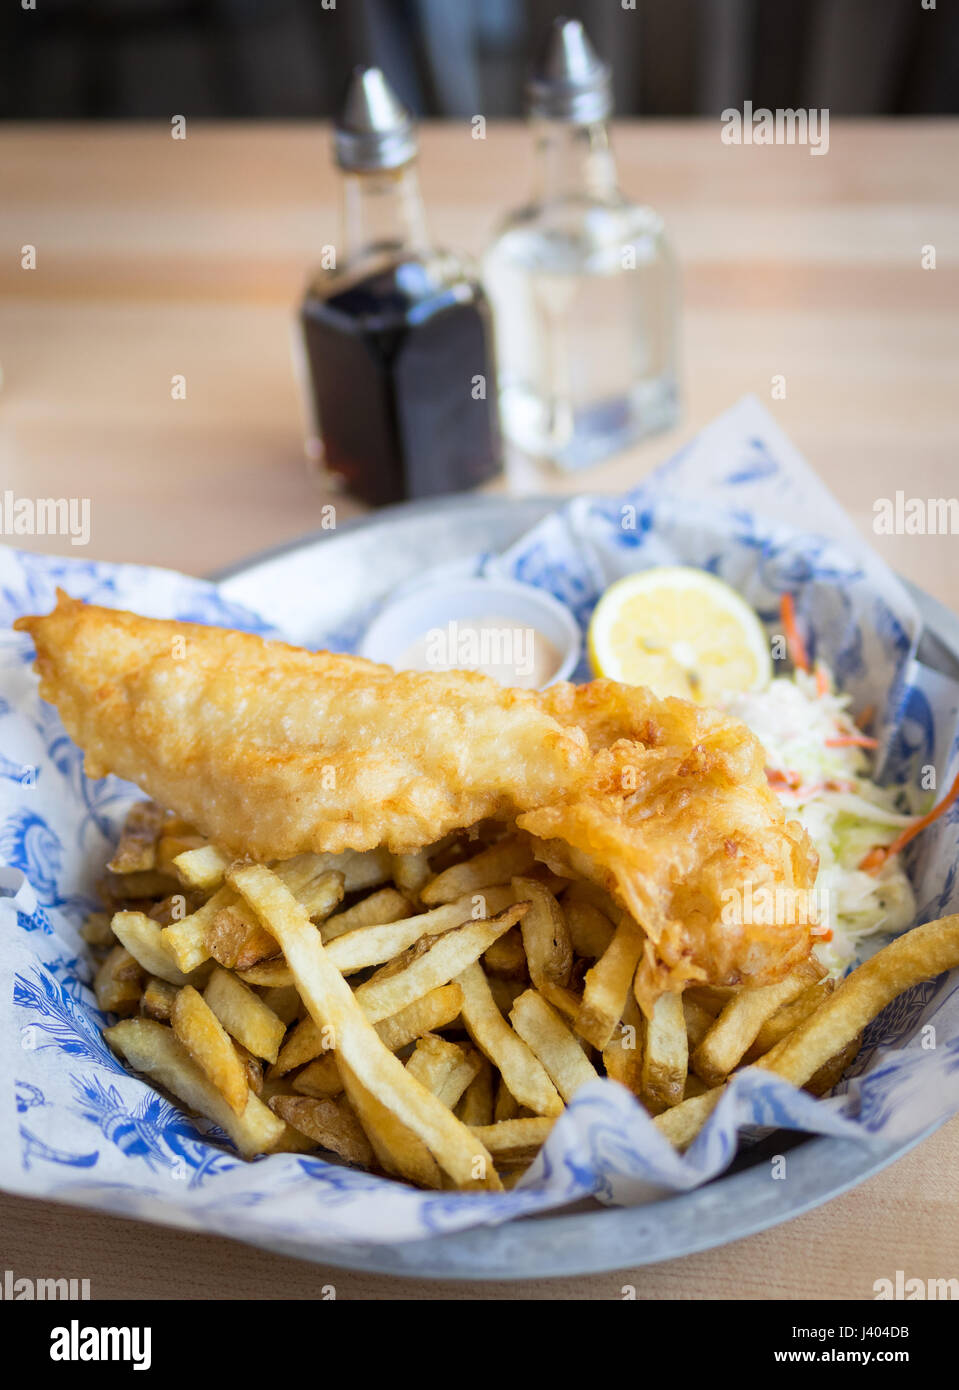 Fish and chips (haddock and chips) from Grandin Fish 'N' Chips, a popular fish and chips shop in Edmonton, Alberta, Canada. Stock Photo